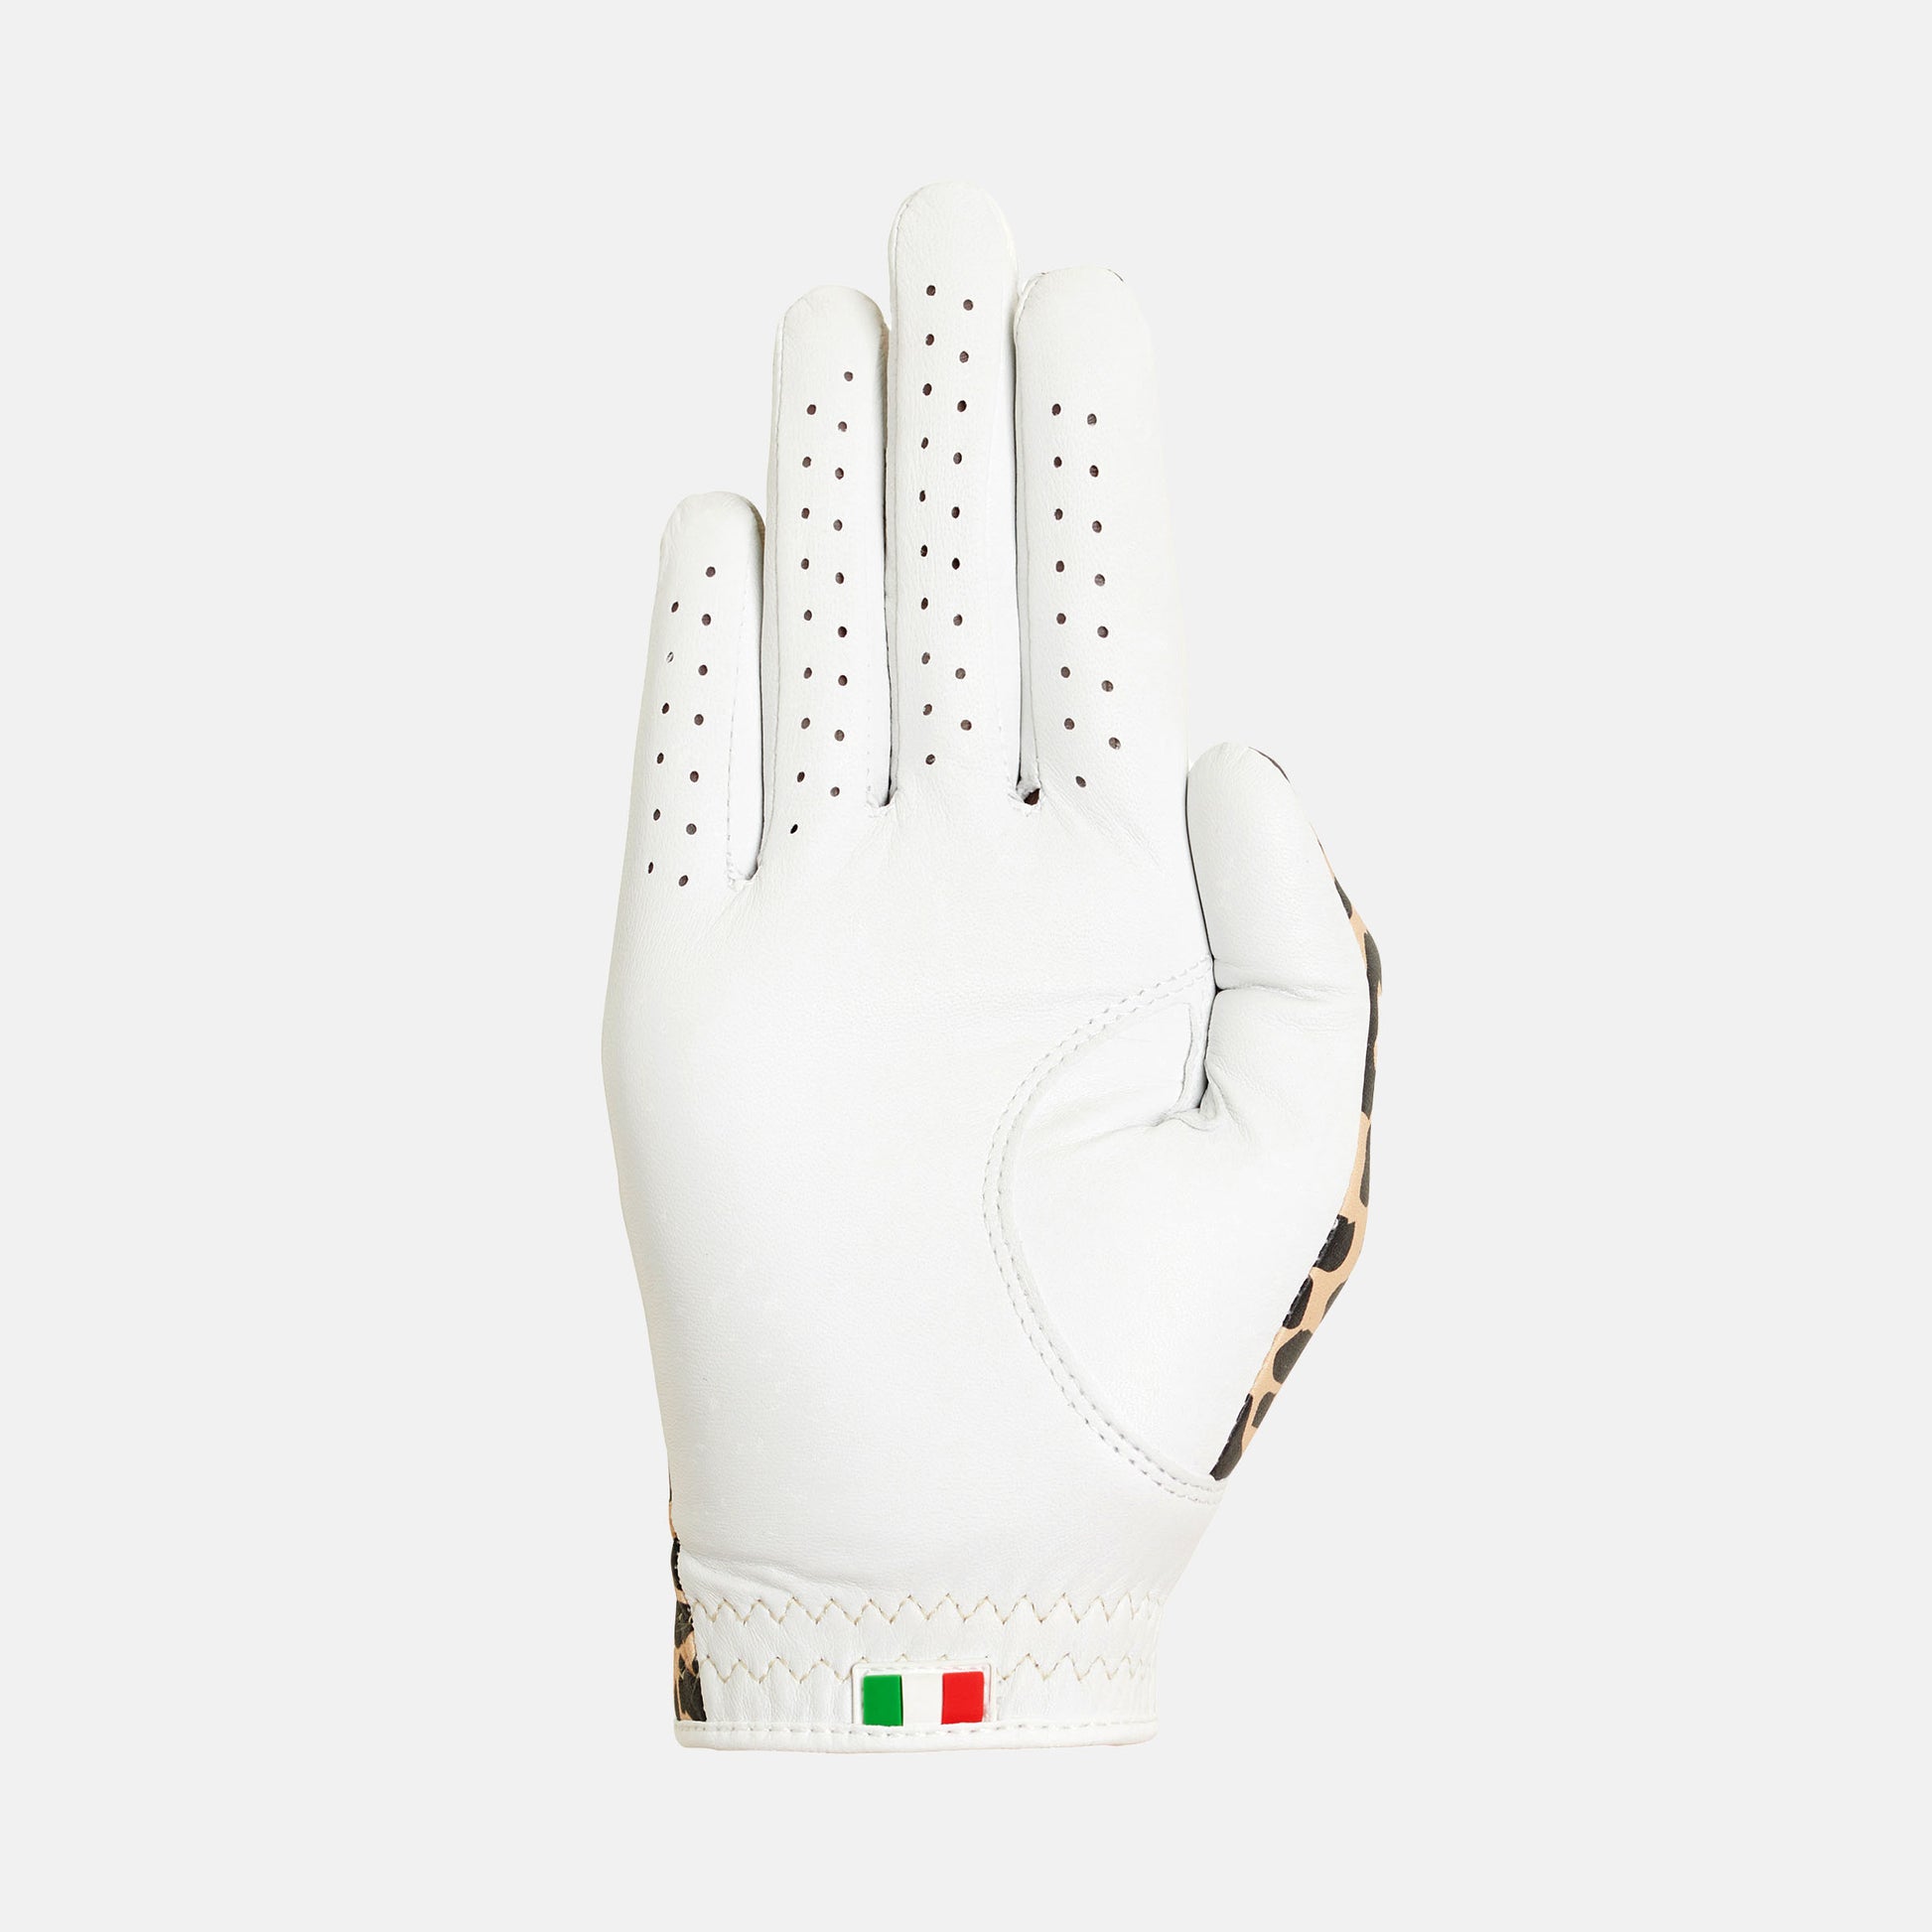 right-handed golf glove for women's designed for left-handed players, features a premium combination of Cabretta leather and microfibre leather.